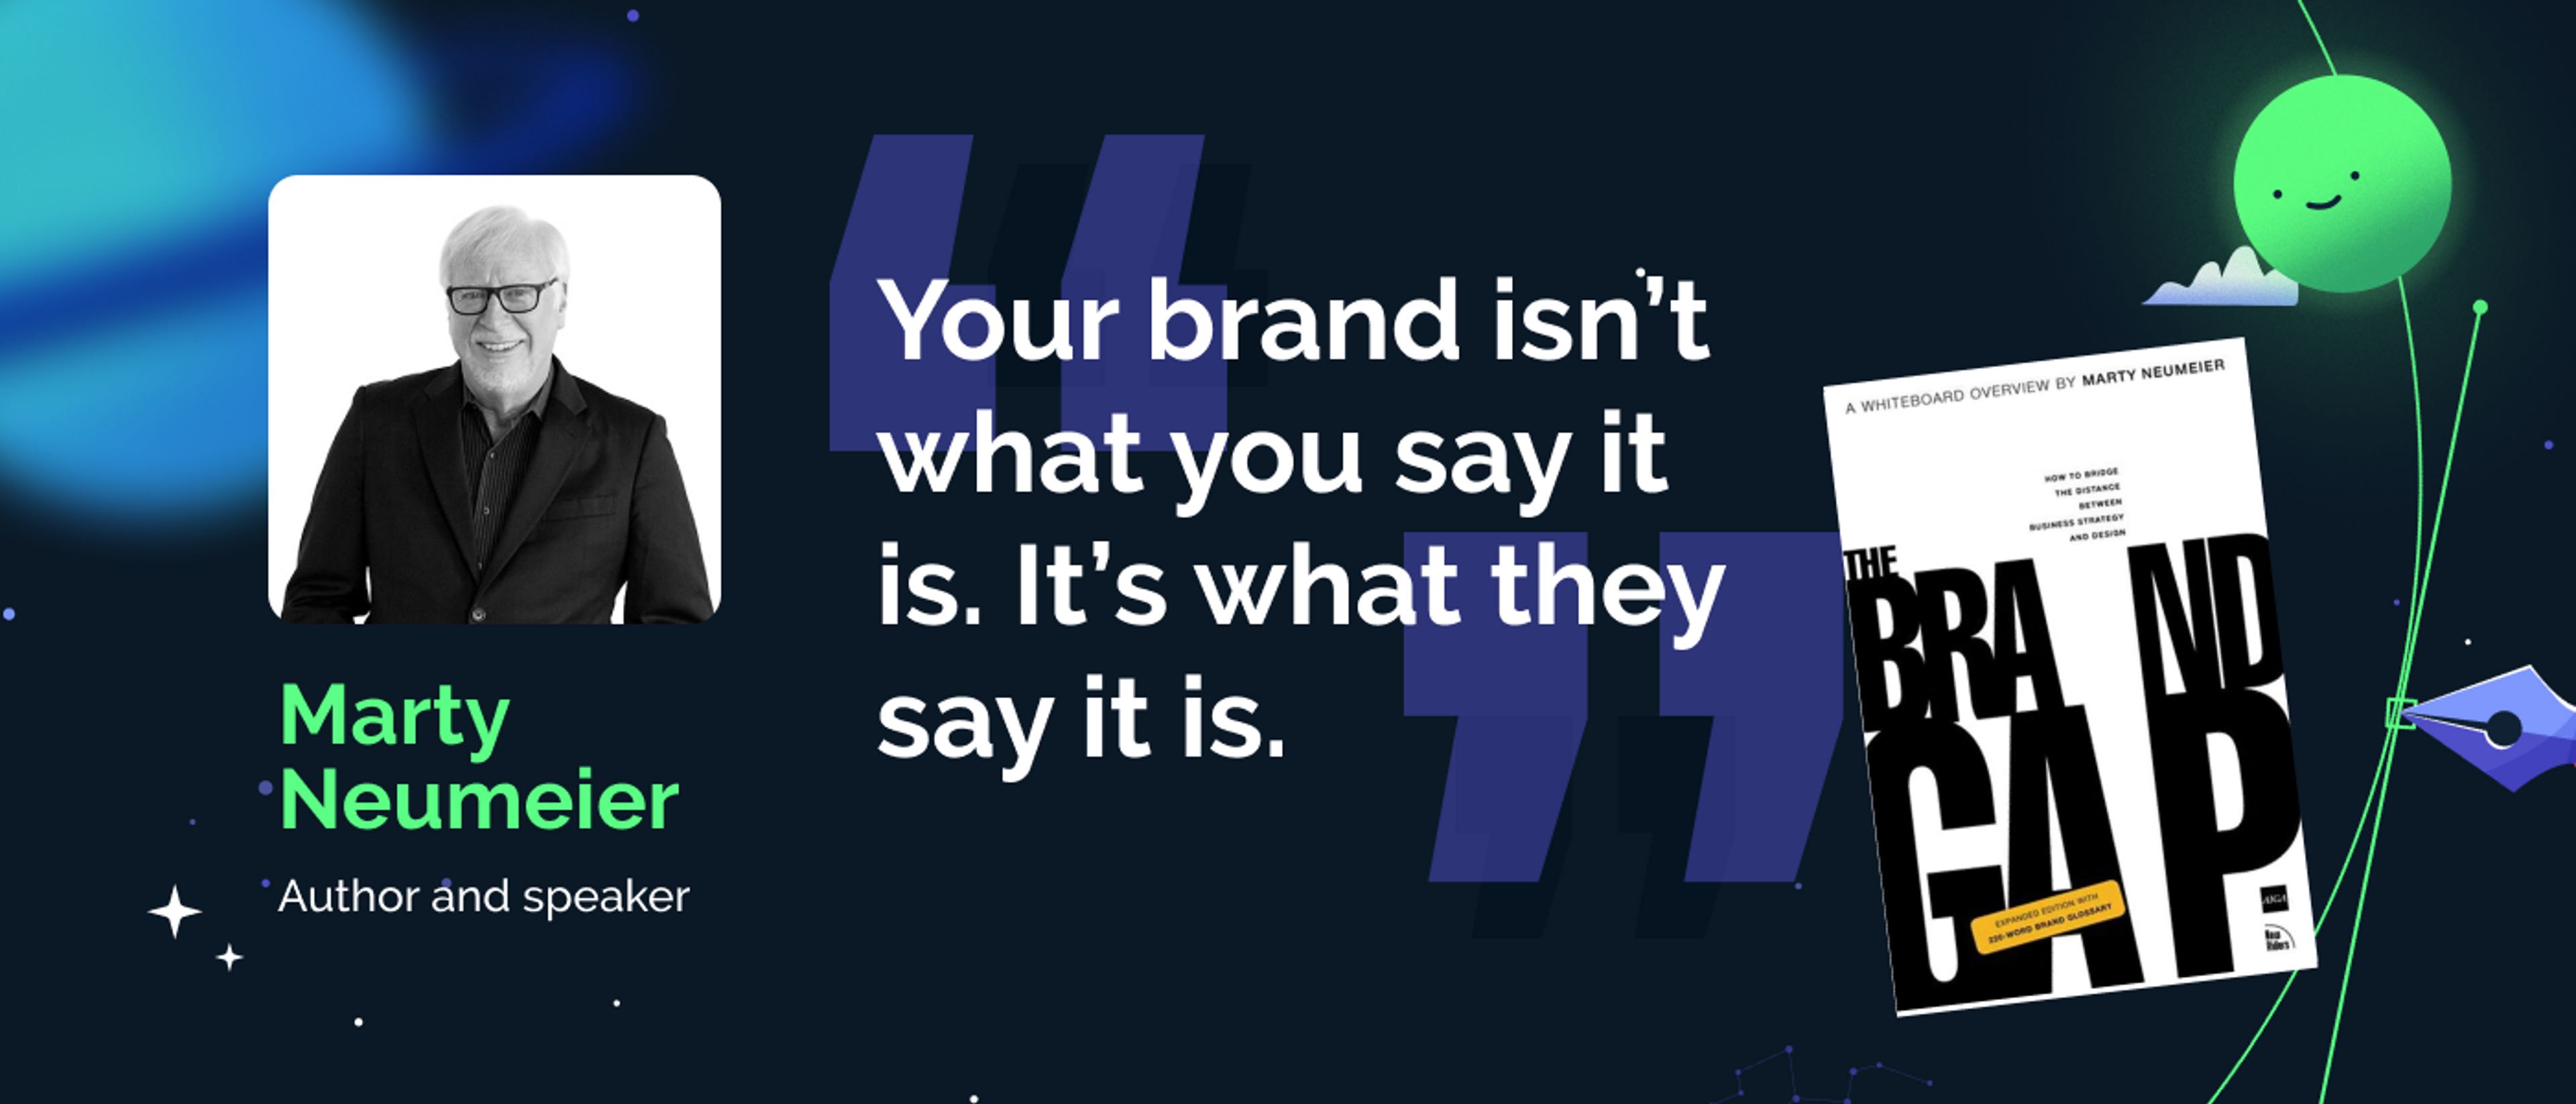 An image showing influencer Marty Neumeier, his book the Brand Gap and his famous quote, "Your brand isn't what you say it is. It's what they say it is."